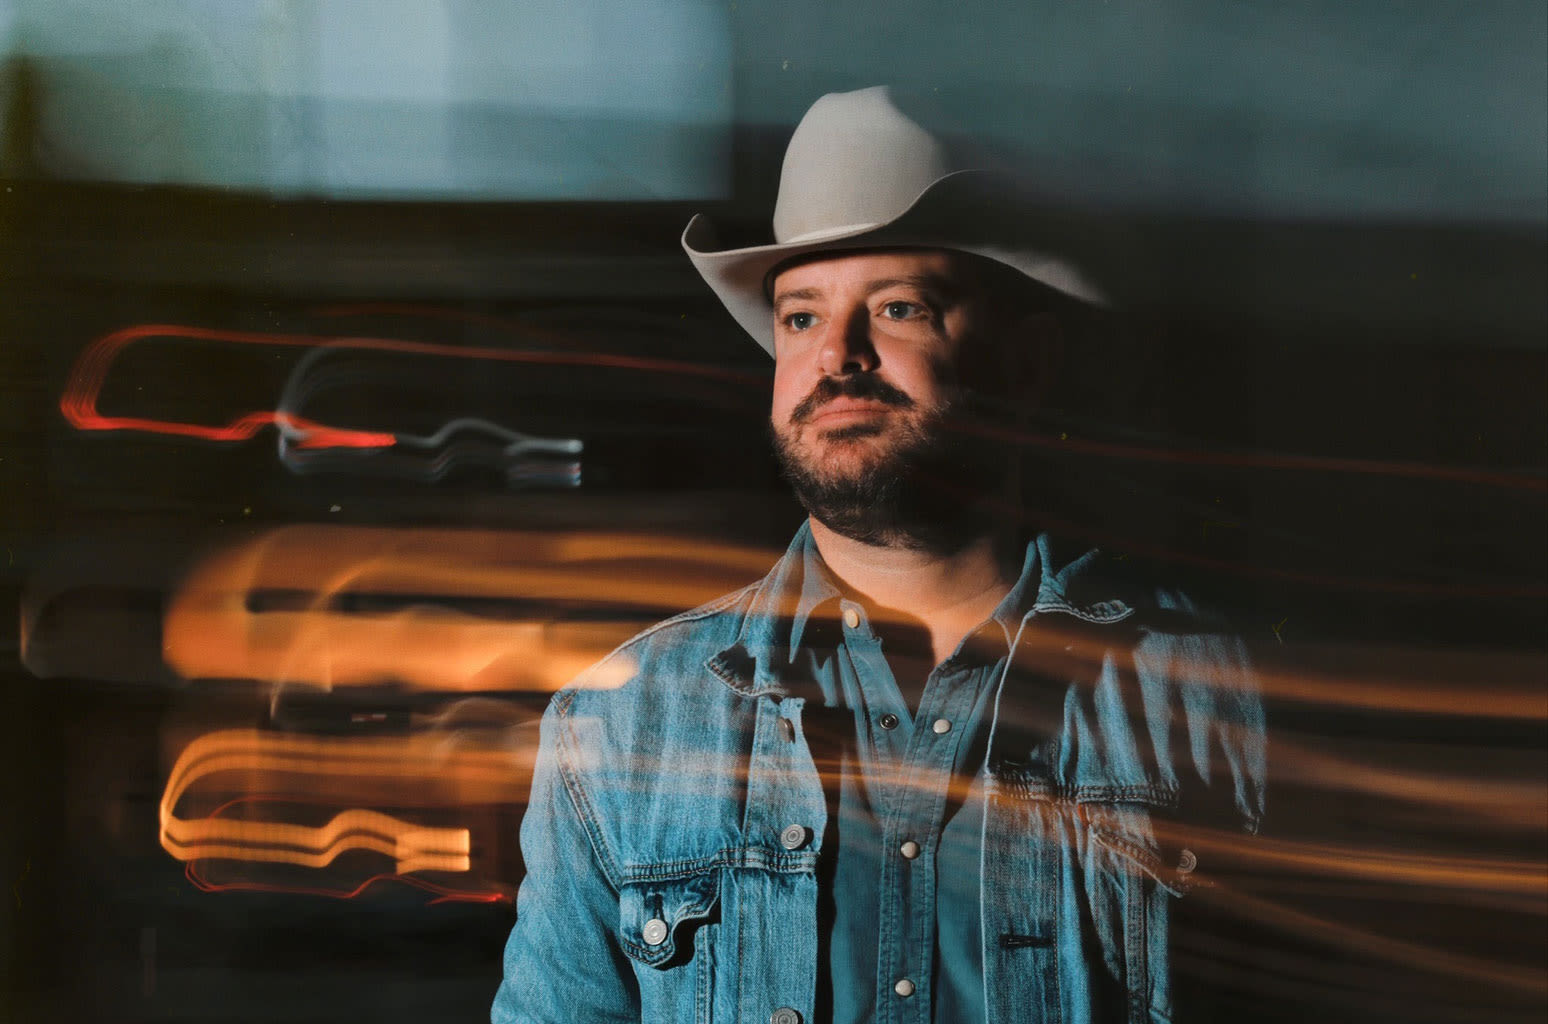 Red-Dirt Leader Wade Bowen Talks Bringing the Party With ‘Nothin But Texas’: ‘Anthems Need to Be Simple’